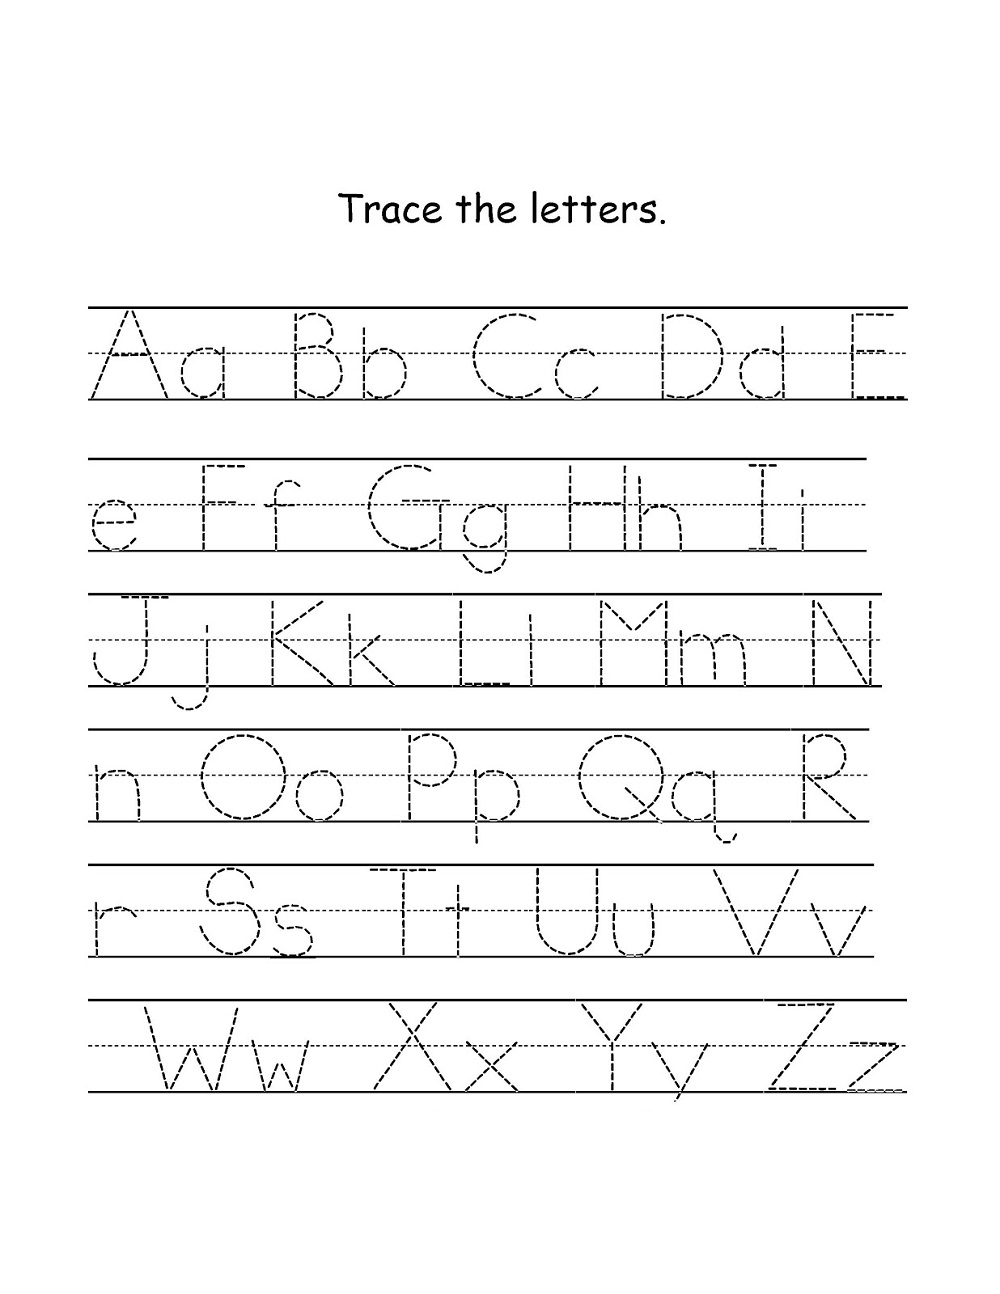 traceable alphabet worksheets a-z easy